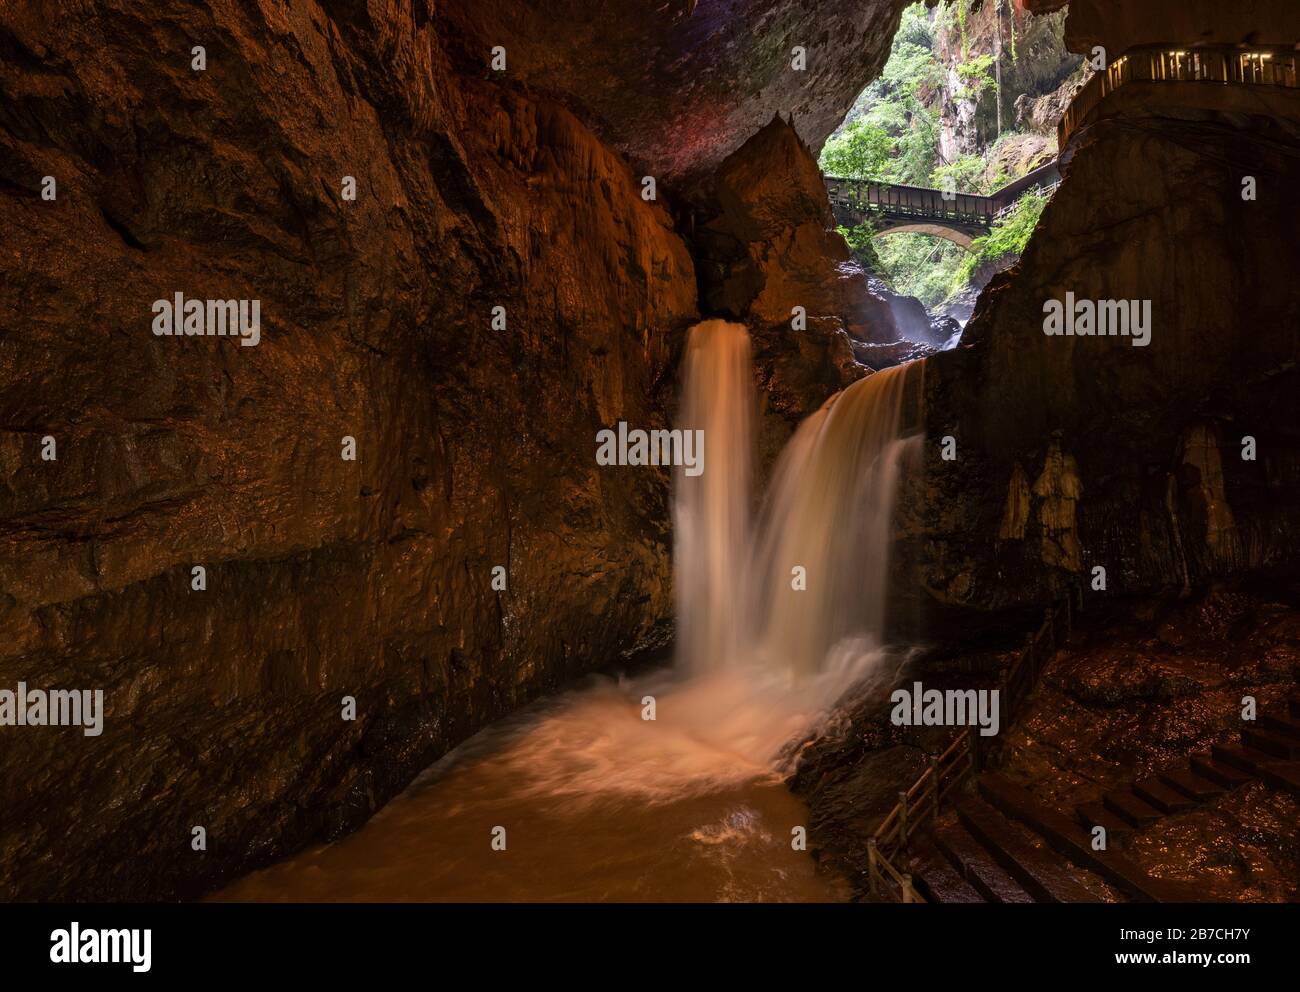 Female and Male Flying Waterfalls, Cíxióng Fēi Pù, in Loying Dragon Cave (Wòlóng Dòng) in Jiuxiang Gorge and Cave wurde in Jackie Chans Filmmyth verwendet. Stockfoto